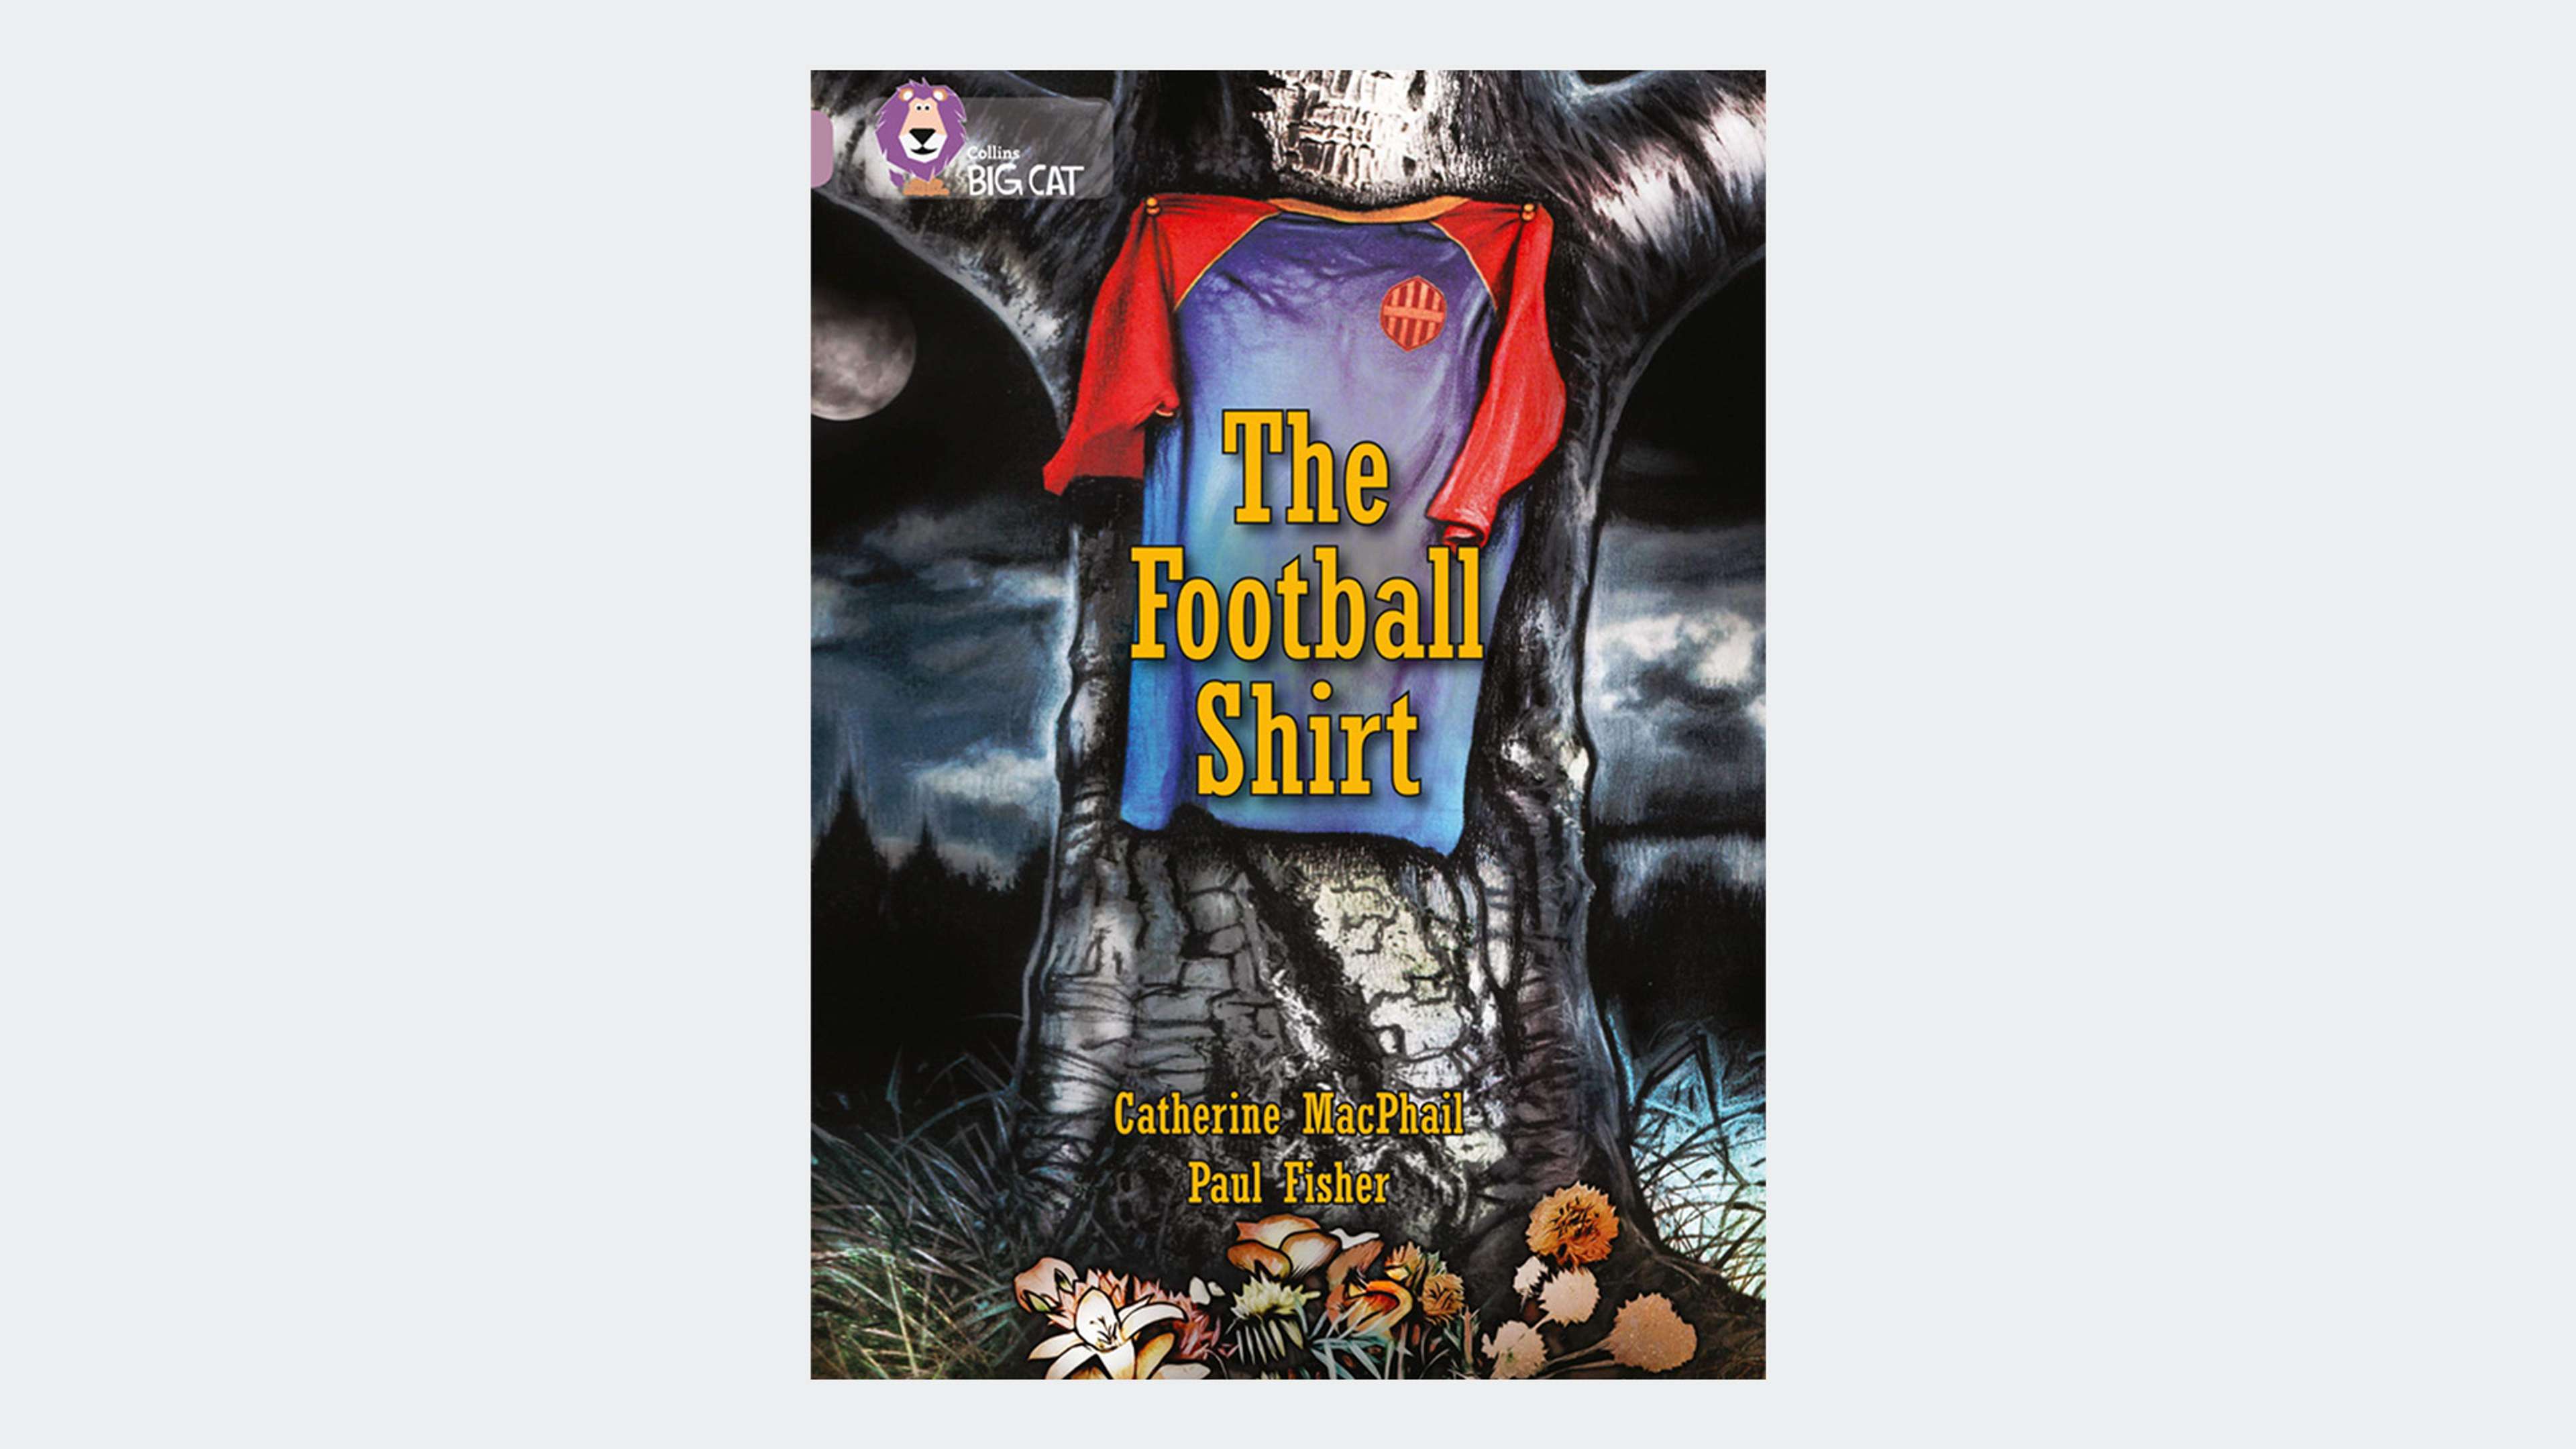 The Football Shirt by Catherine McPhail